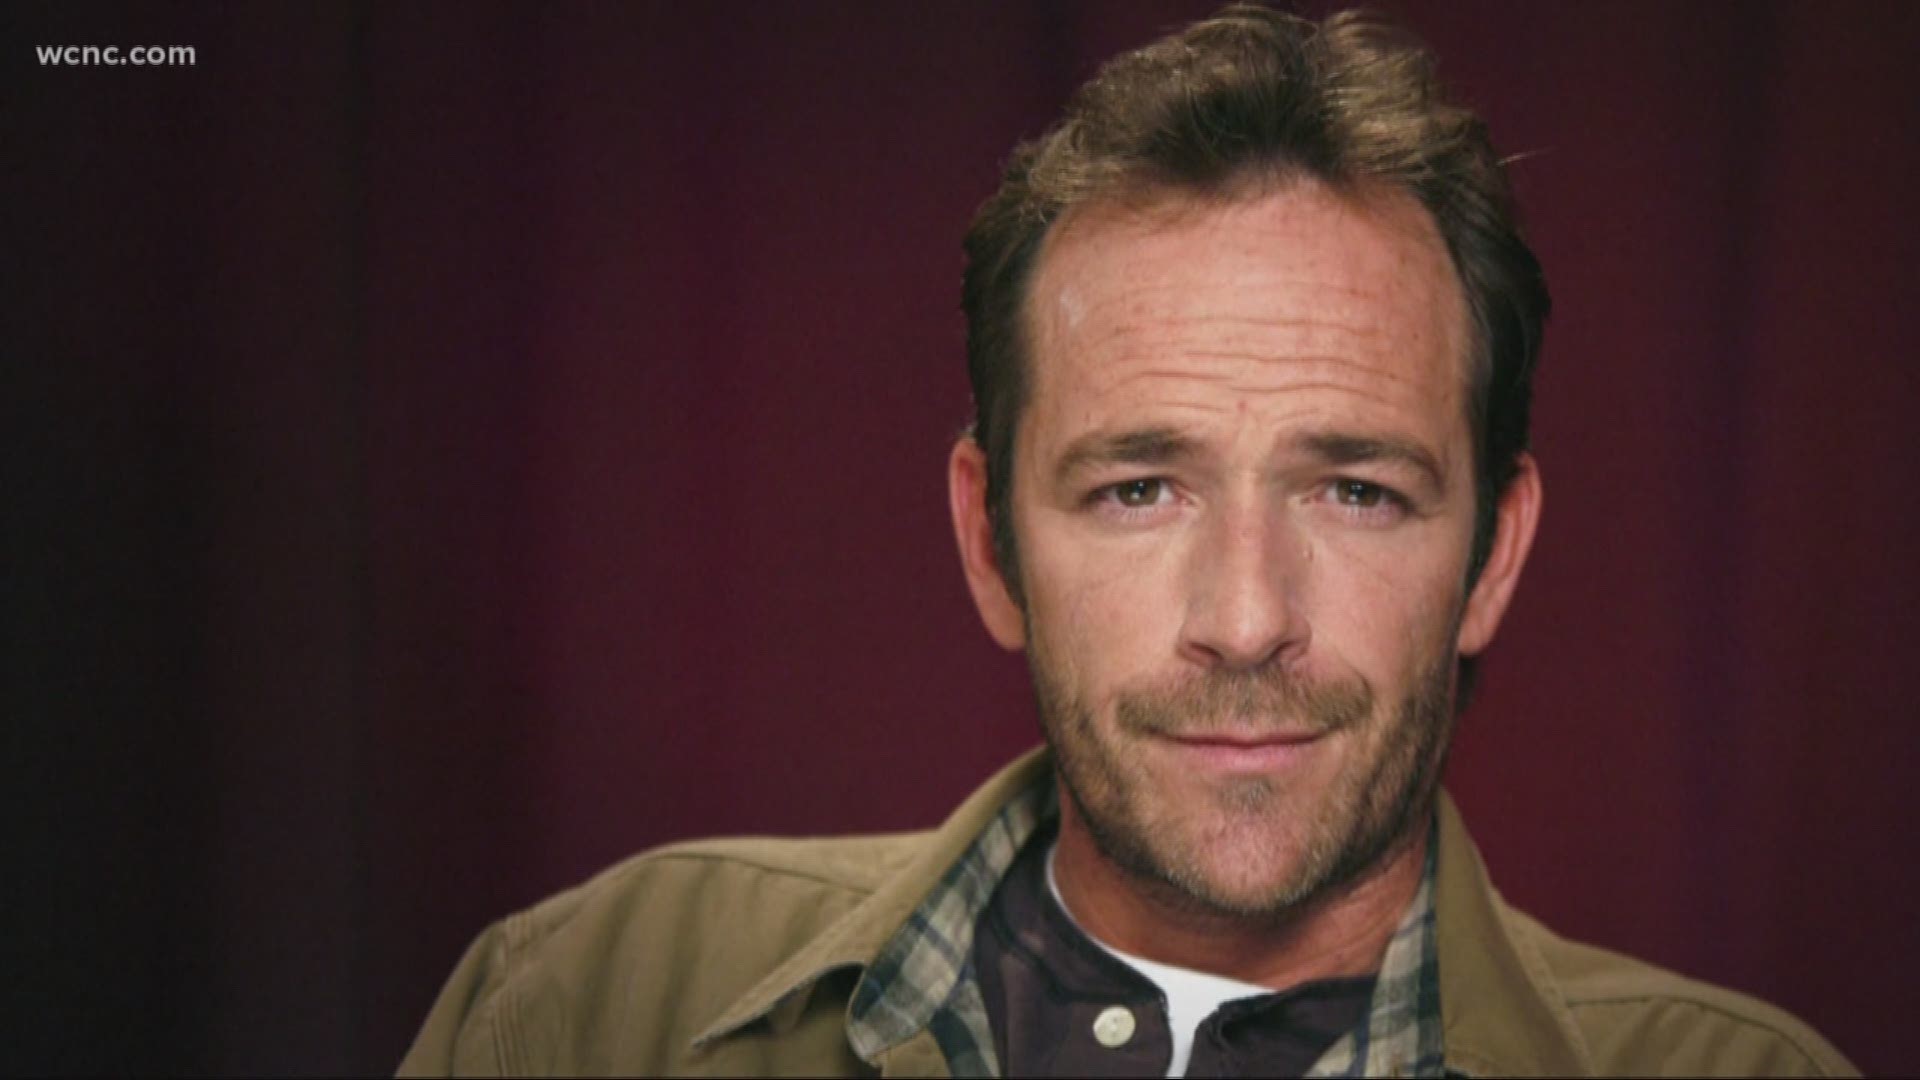 Strokes can happen to anyone. As seen with the passing of beloved television star Luke Perry, sometimes there are warning signs but other times it happens out of the blue.